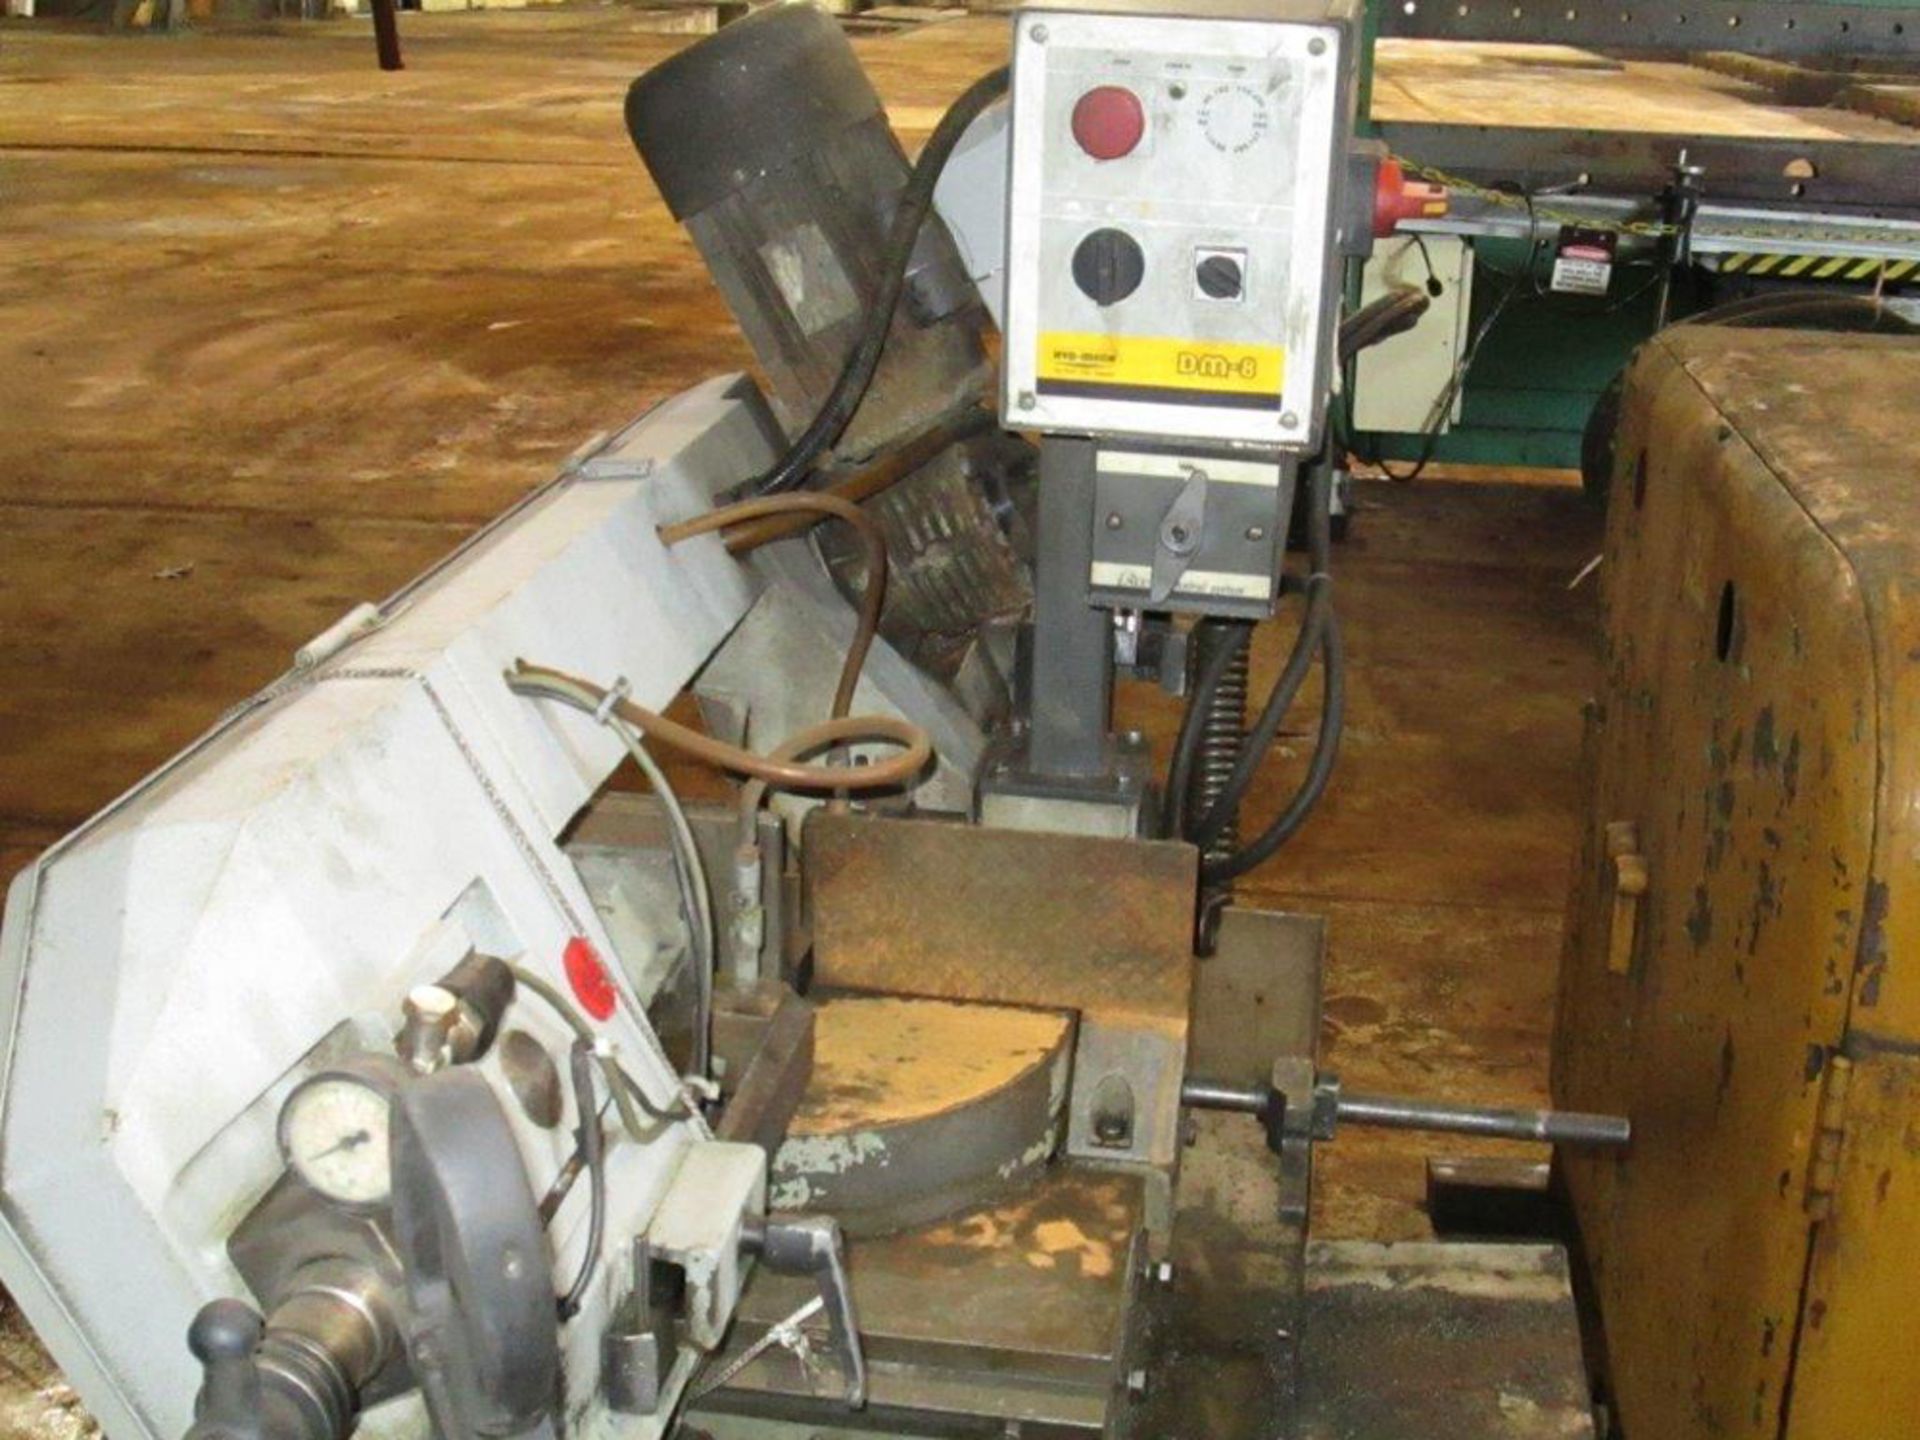 8" Round Hyd Mech DM8 Dbl. Miter Horiz. Metal Cutting Bandsaw - Located In: Huntington Park, CA - Image 3 of 3